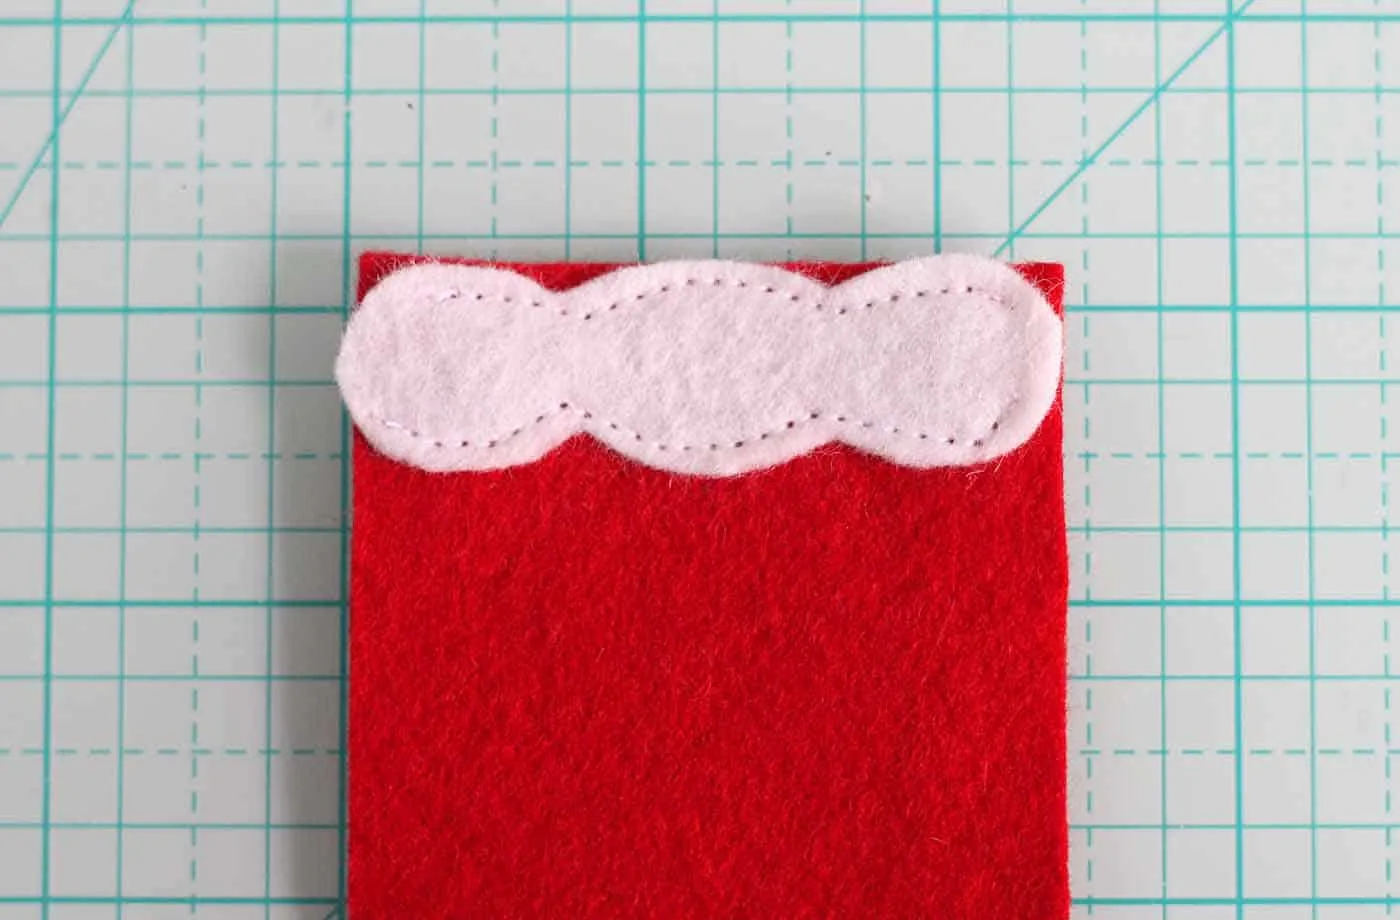 White felt sewn to one end of the red felt